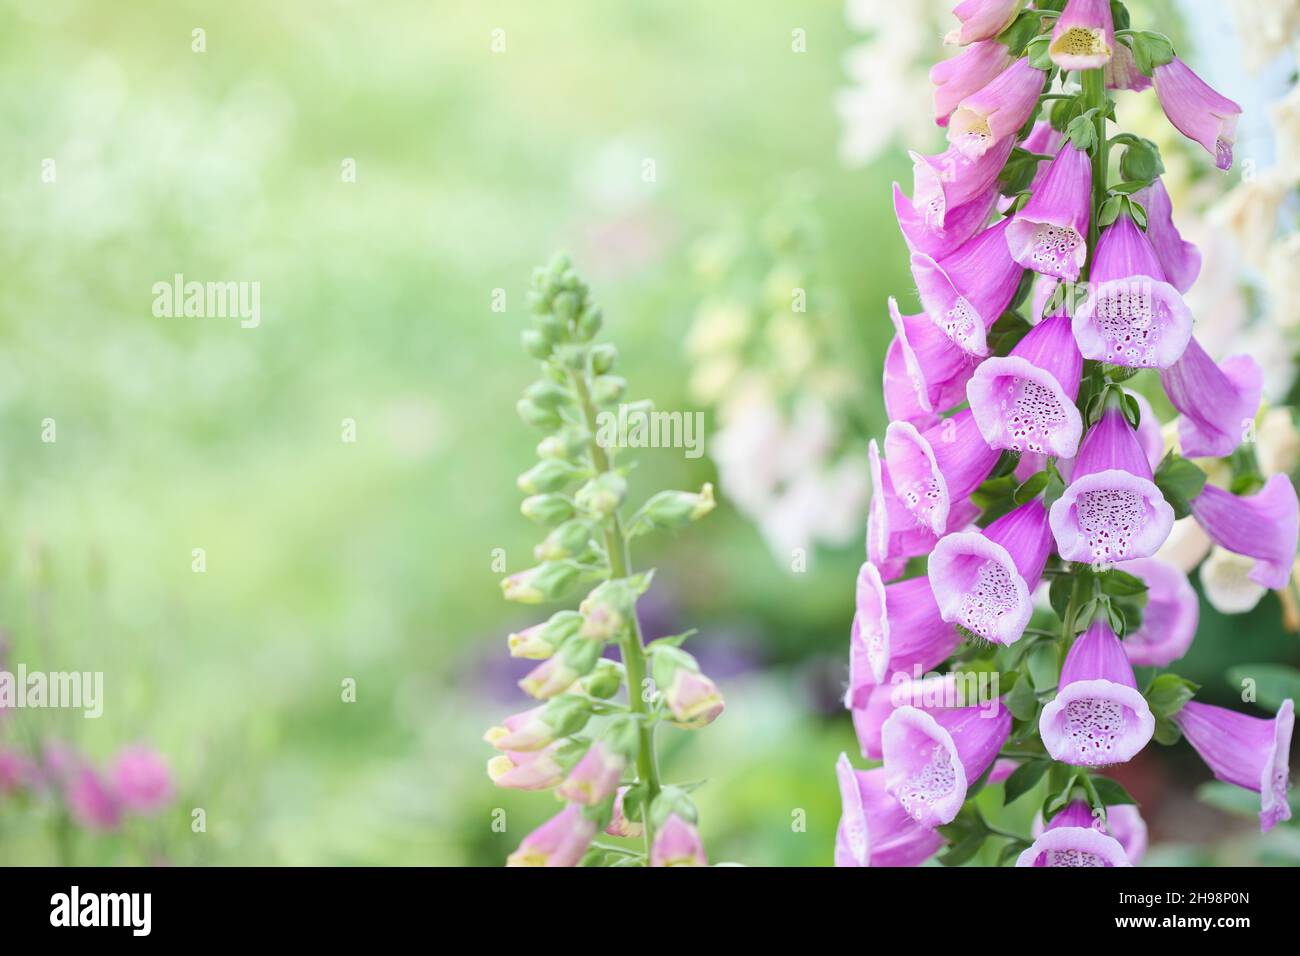 Closeup of a fresh pink apricot color Foxglove Digitalis flower stalk blooming outdoors. Selective focus with extreme shallow depth of field.  Blurred Stock Photo